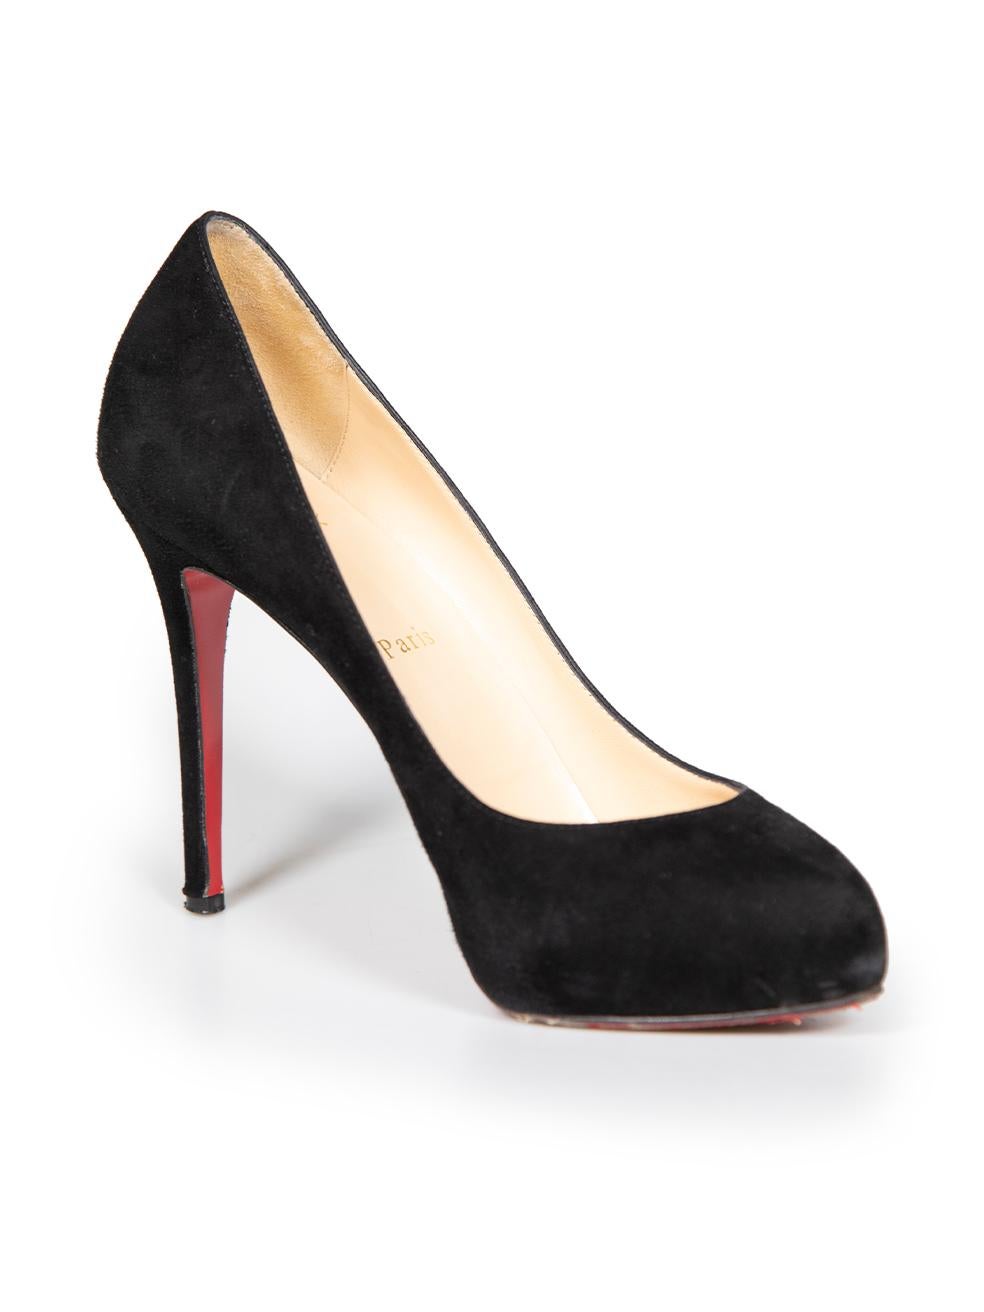 CONDITION is Good. Minor wear to pumps is evident. Light wear to the uppers with some minor abrasion to the pile found at the toes and heels in particular. Reasonably significant abrasion is seen through the outsoles of this used Christian Louboutin